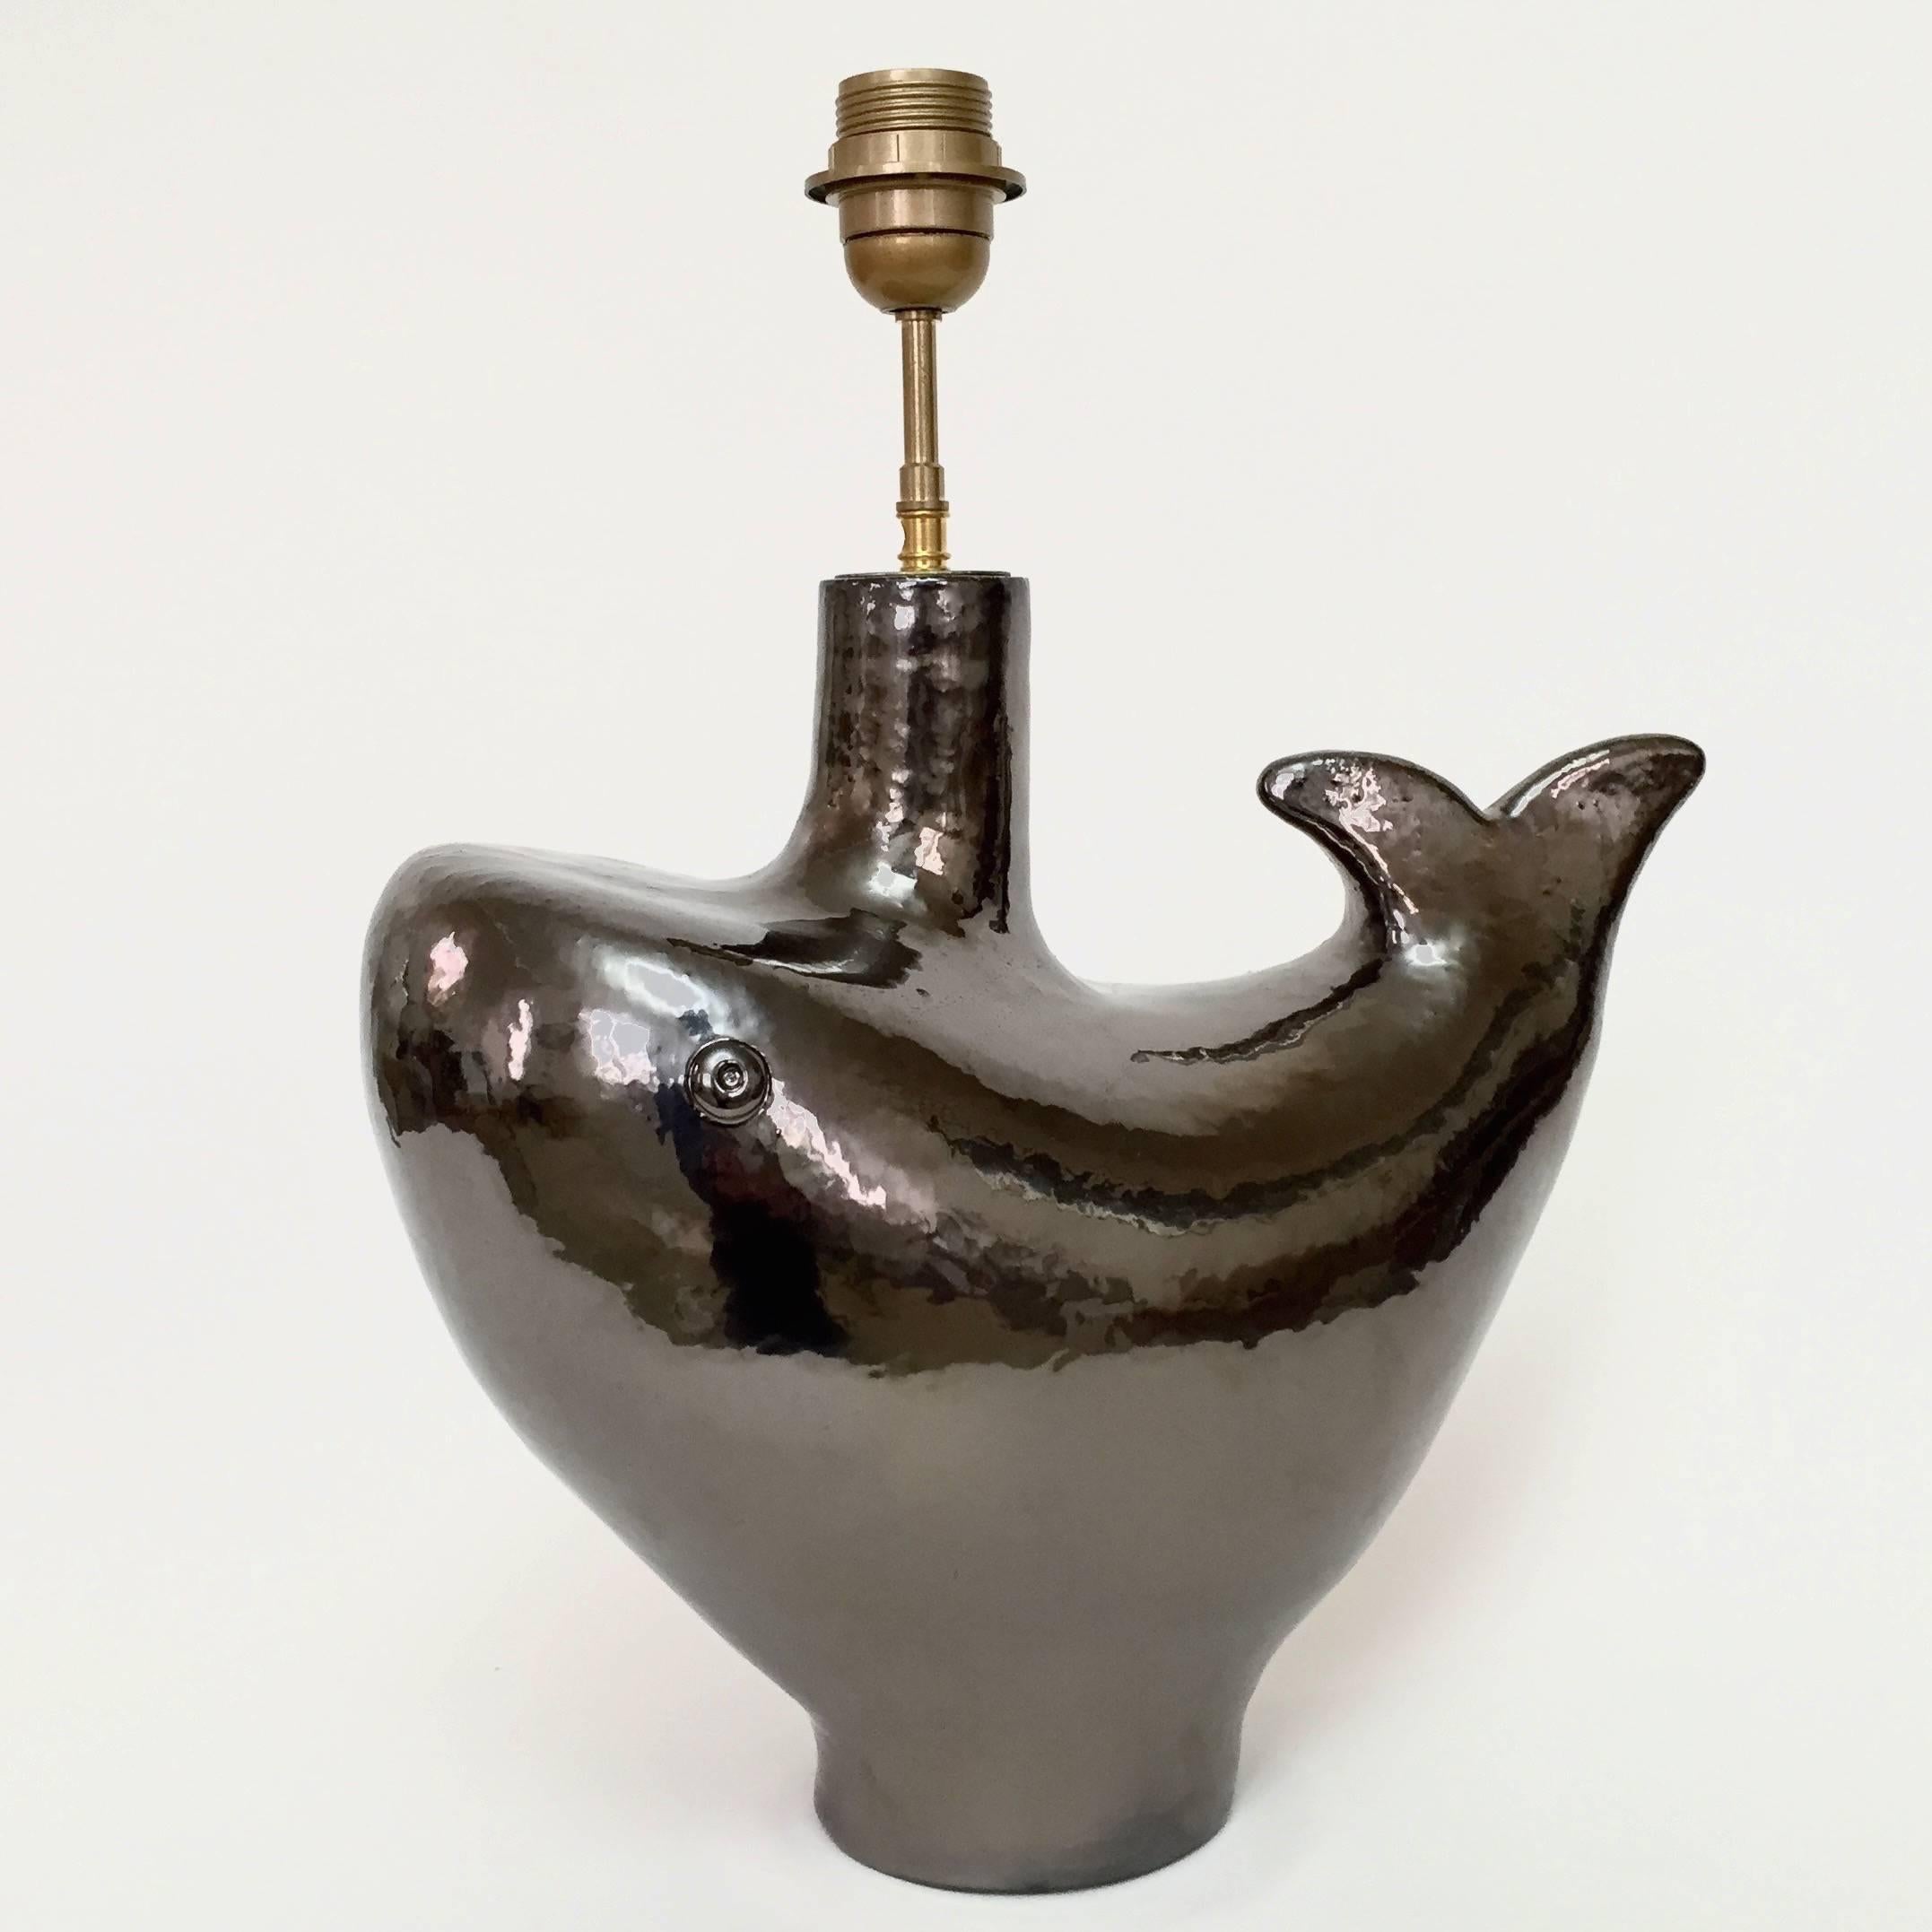 Handcrafted sculpture forming a biomorphic table lamp-base, stylized fish shaped.
Stoneware enameled with a glossy golden bronze glaze. 
One of a kind ceramic piece designed and signed by the French artists and ceramicists, Dalo. 

The height